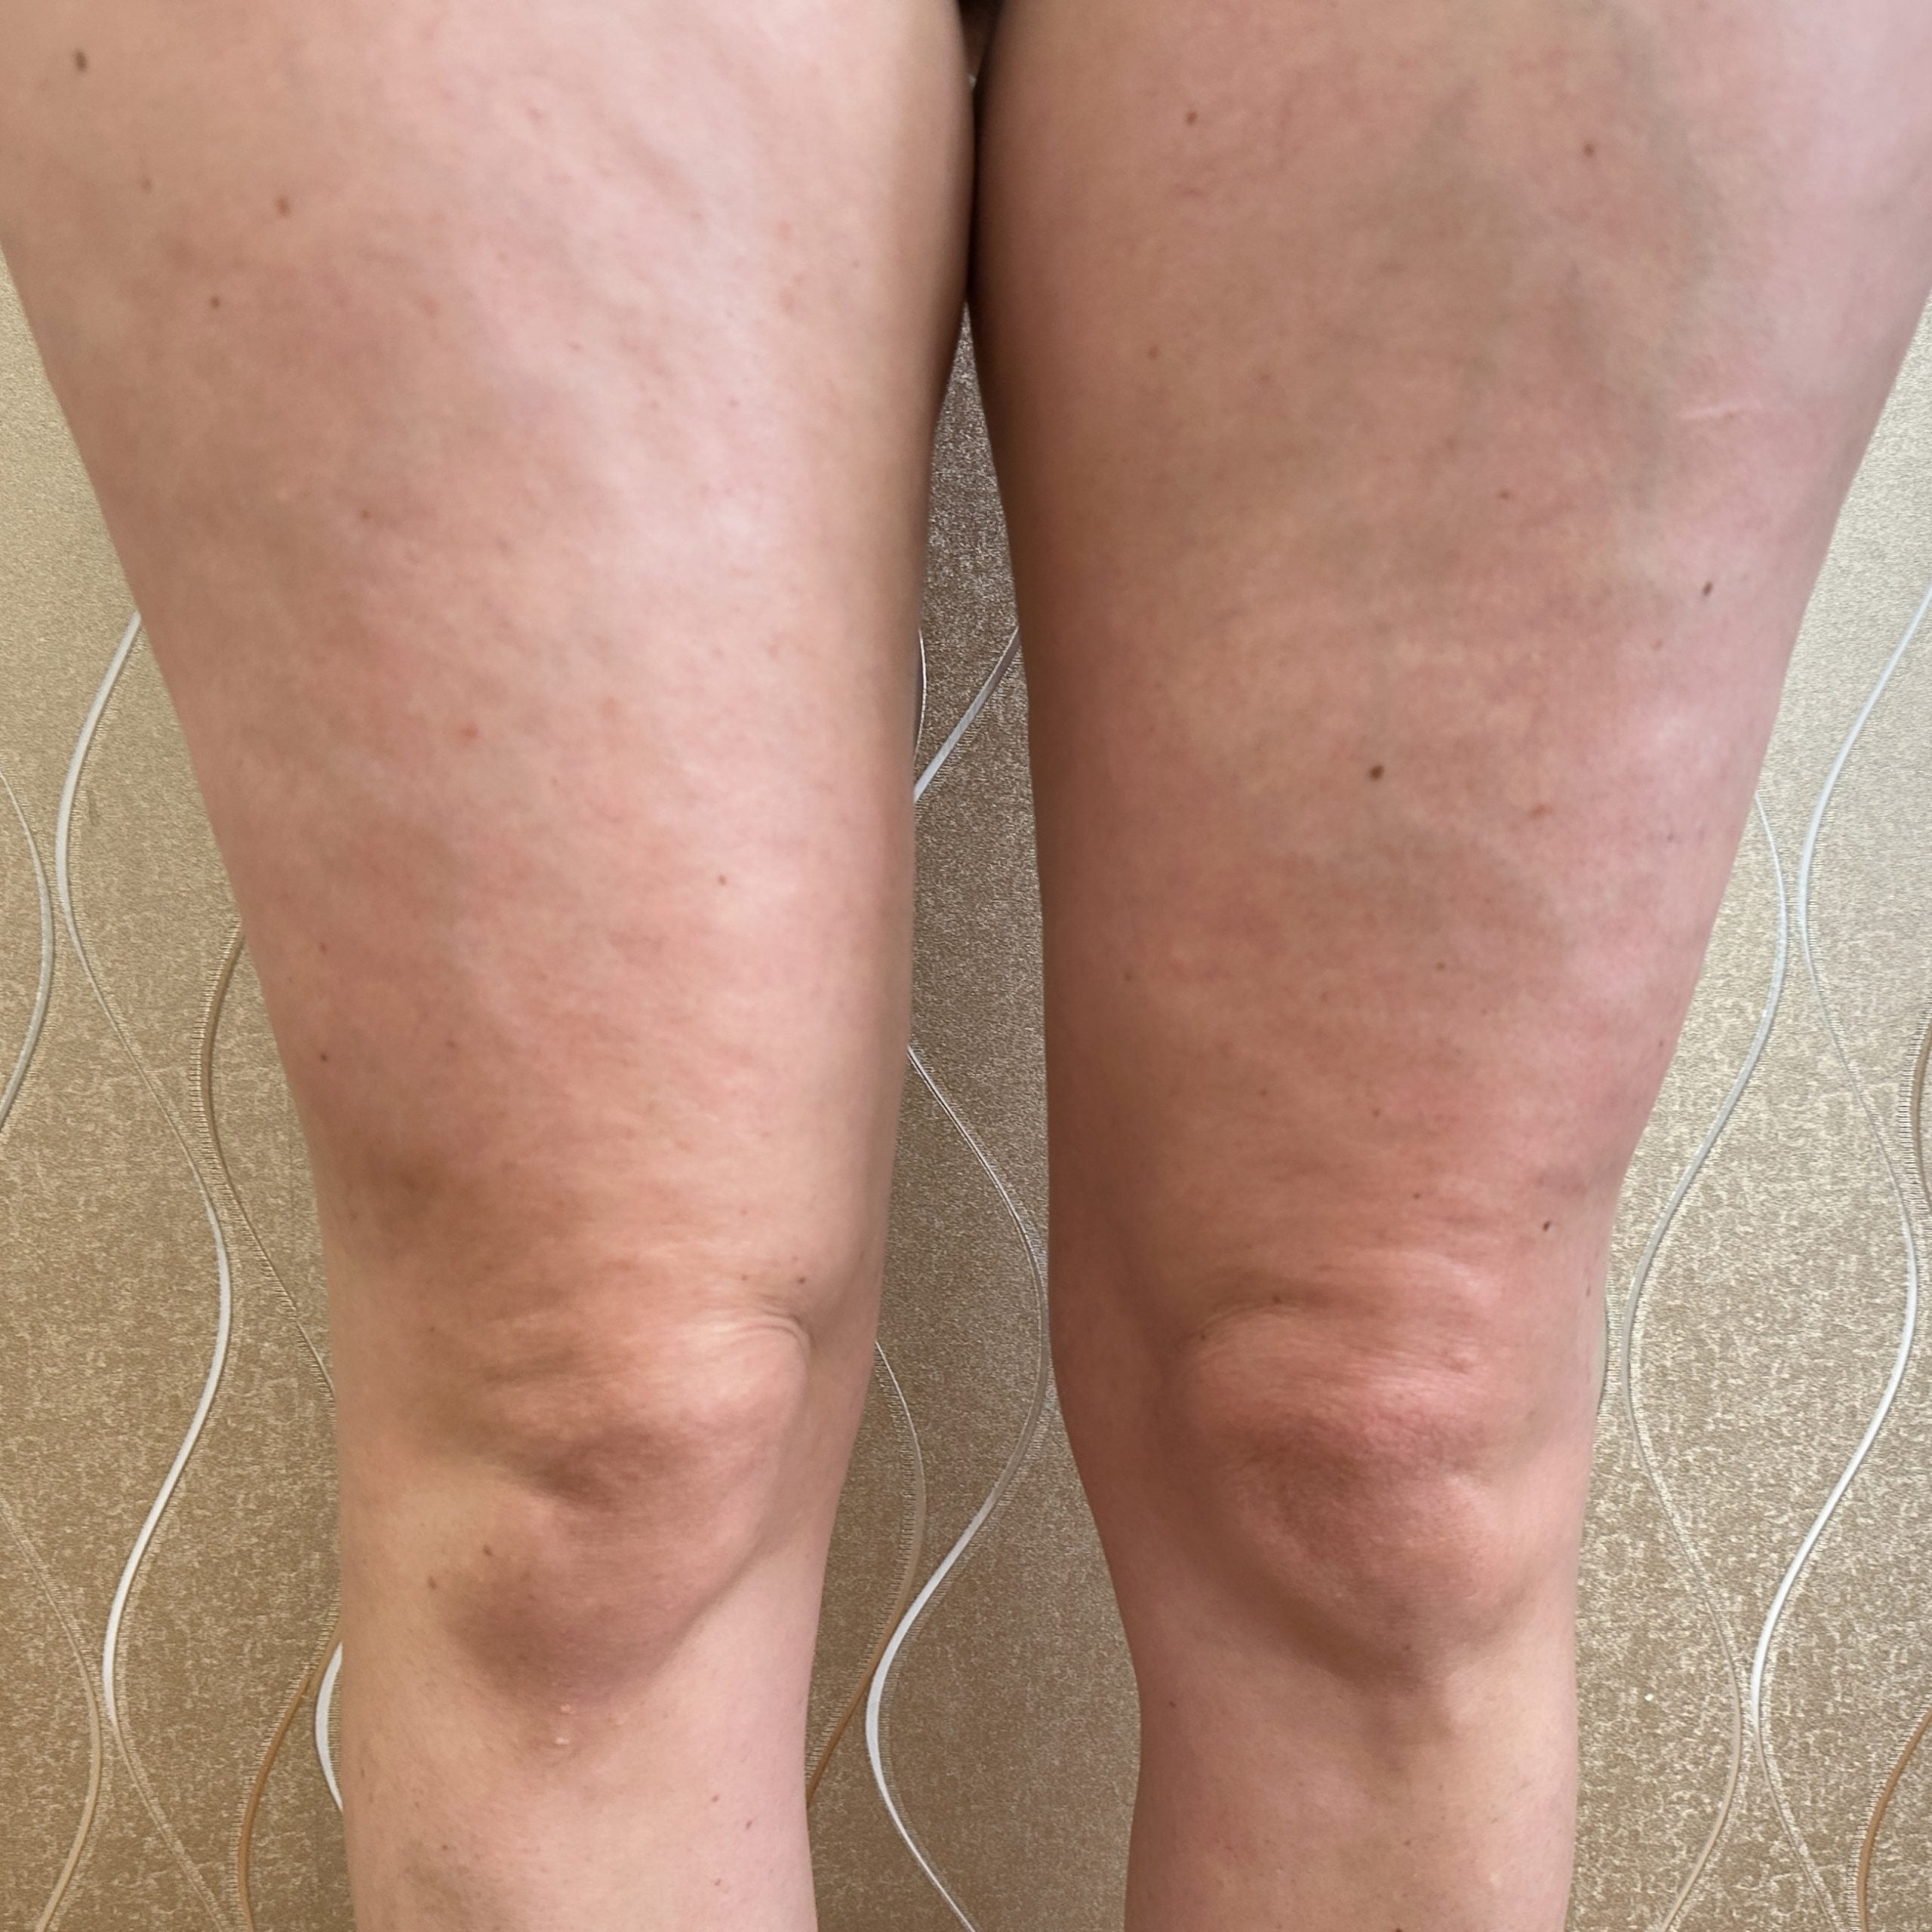 After 3 sessions of NuEra cellulite reduction